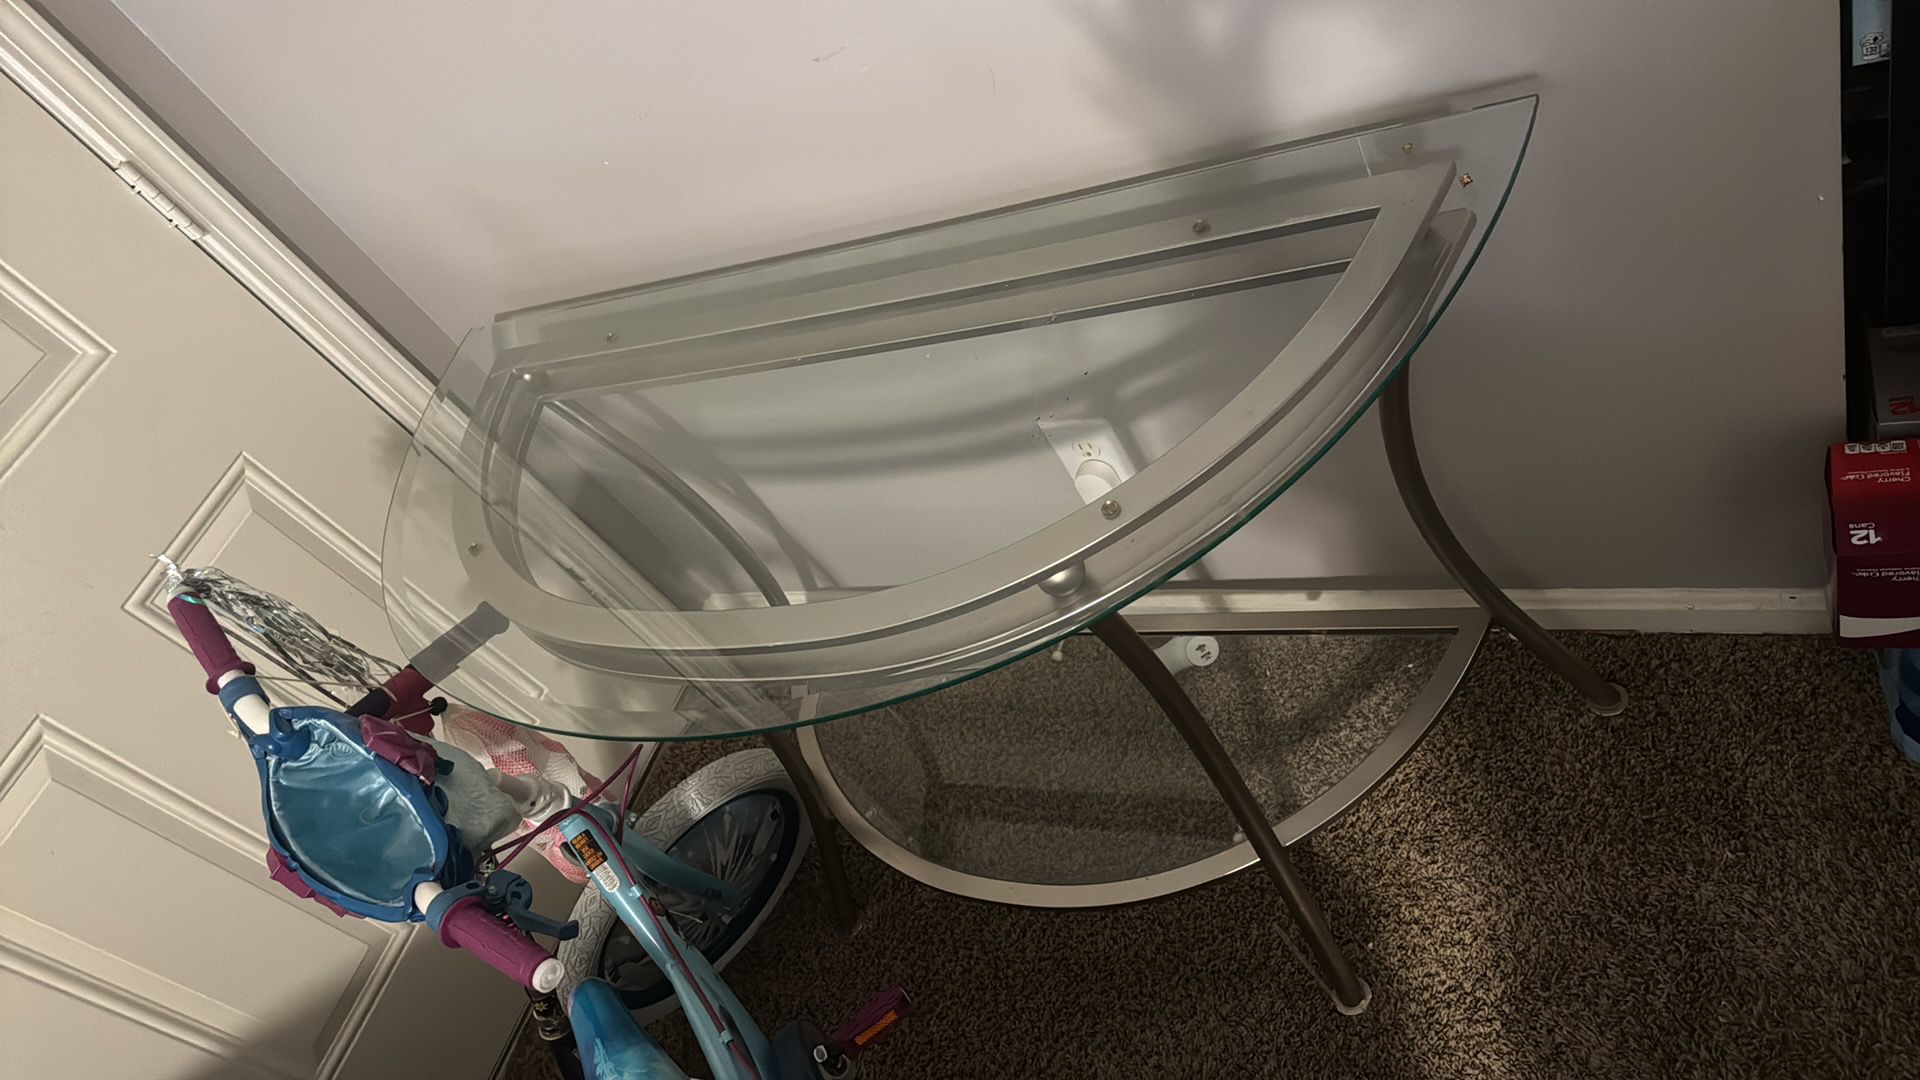 Glass Off /end Tables